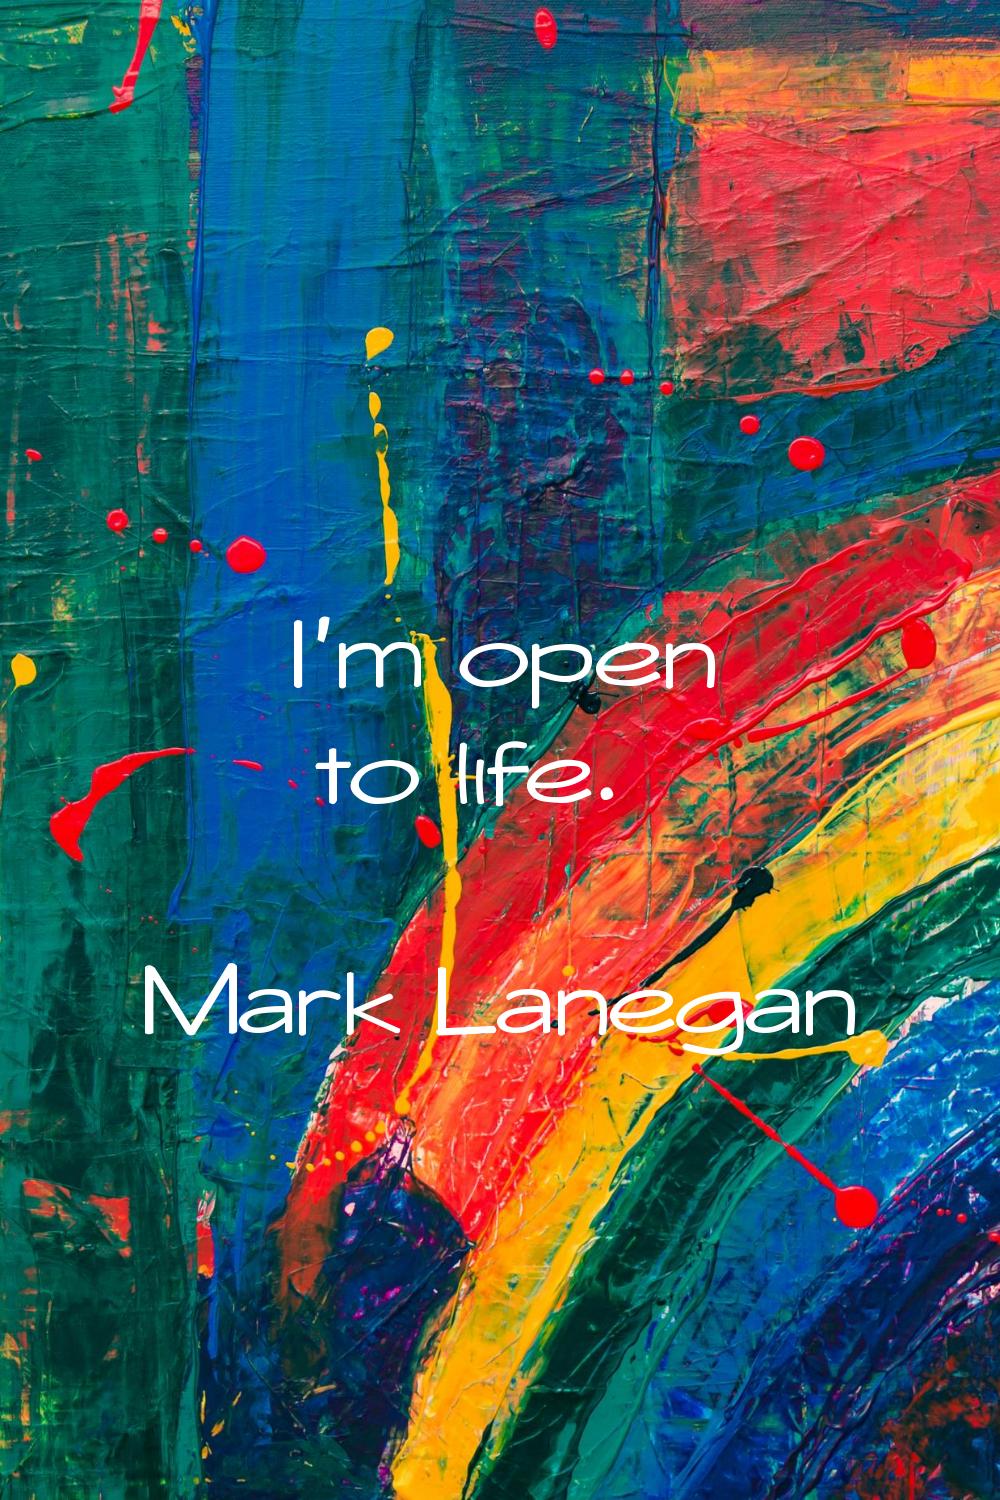 I'm open to life.